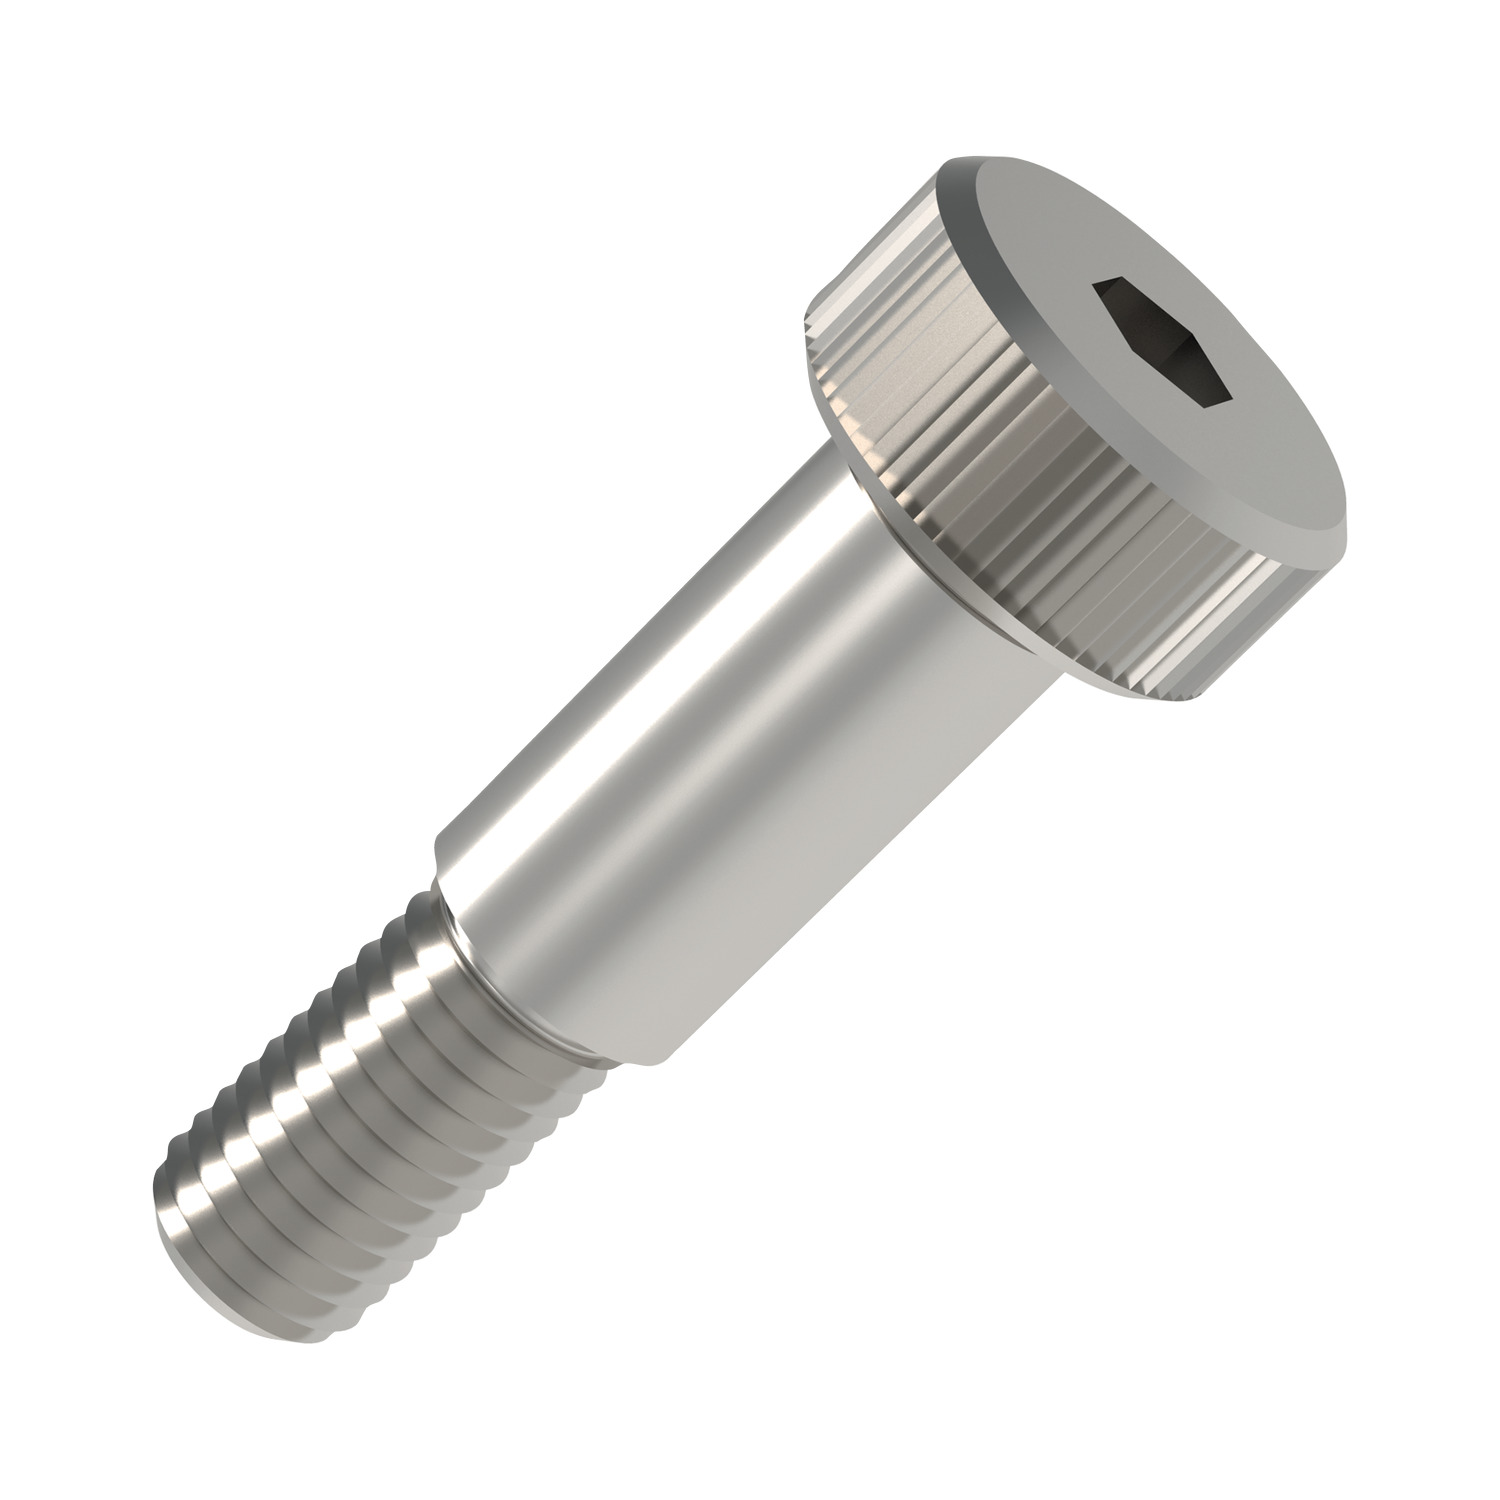 Product P0137, Shoulder Screws - Hex. Socket Head Large sizes A2 stainless / 